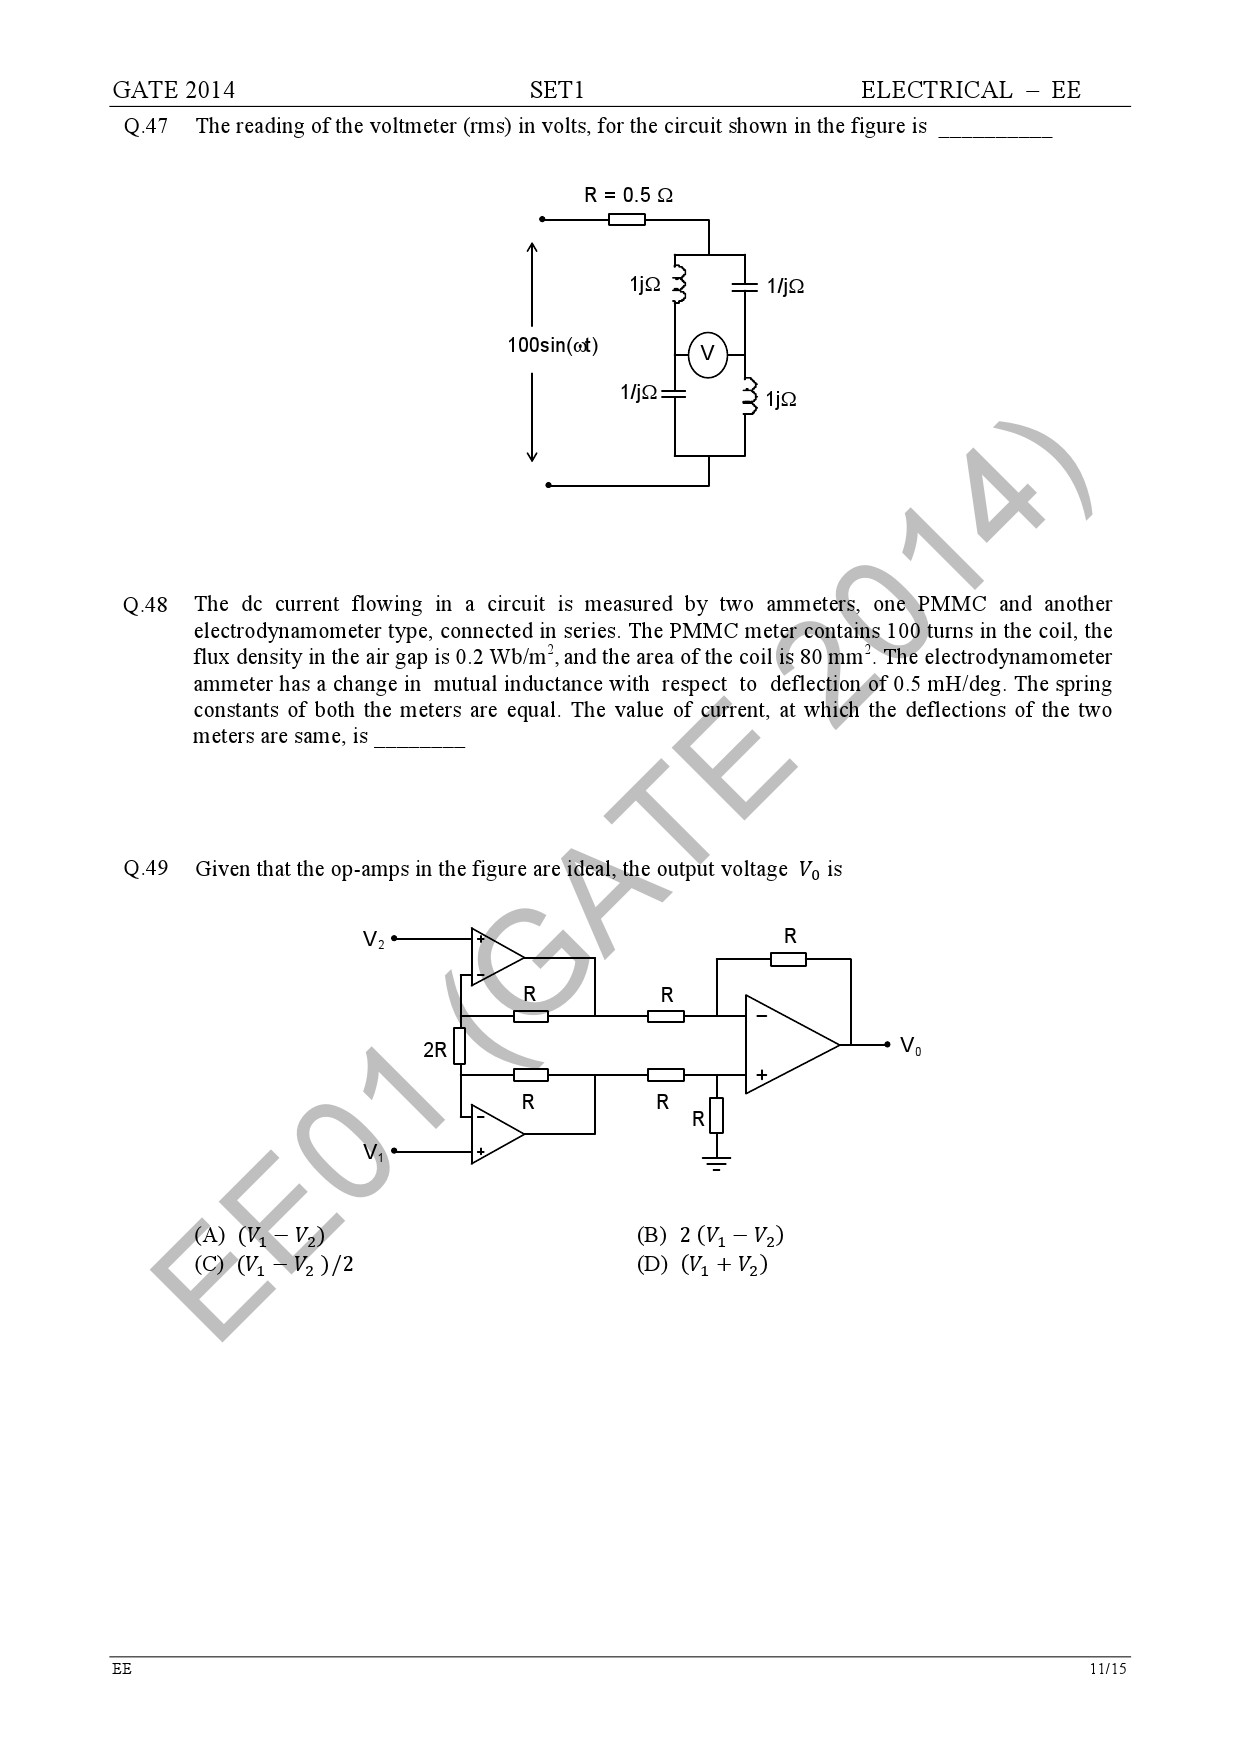 GATE Exam Question Paper 2014 Electrical Engineering Set 1 17